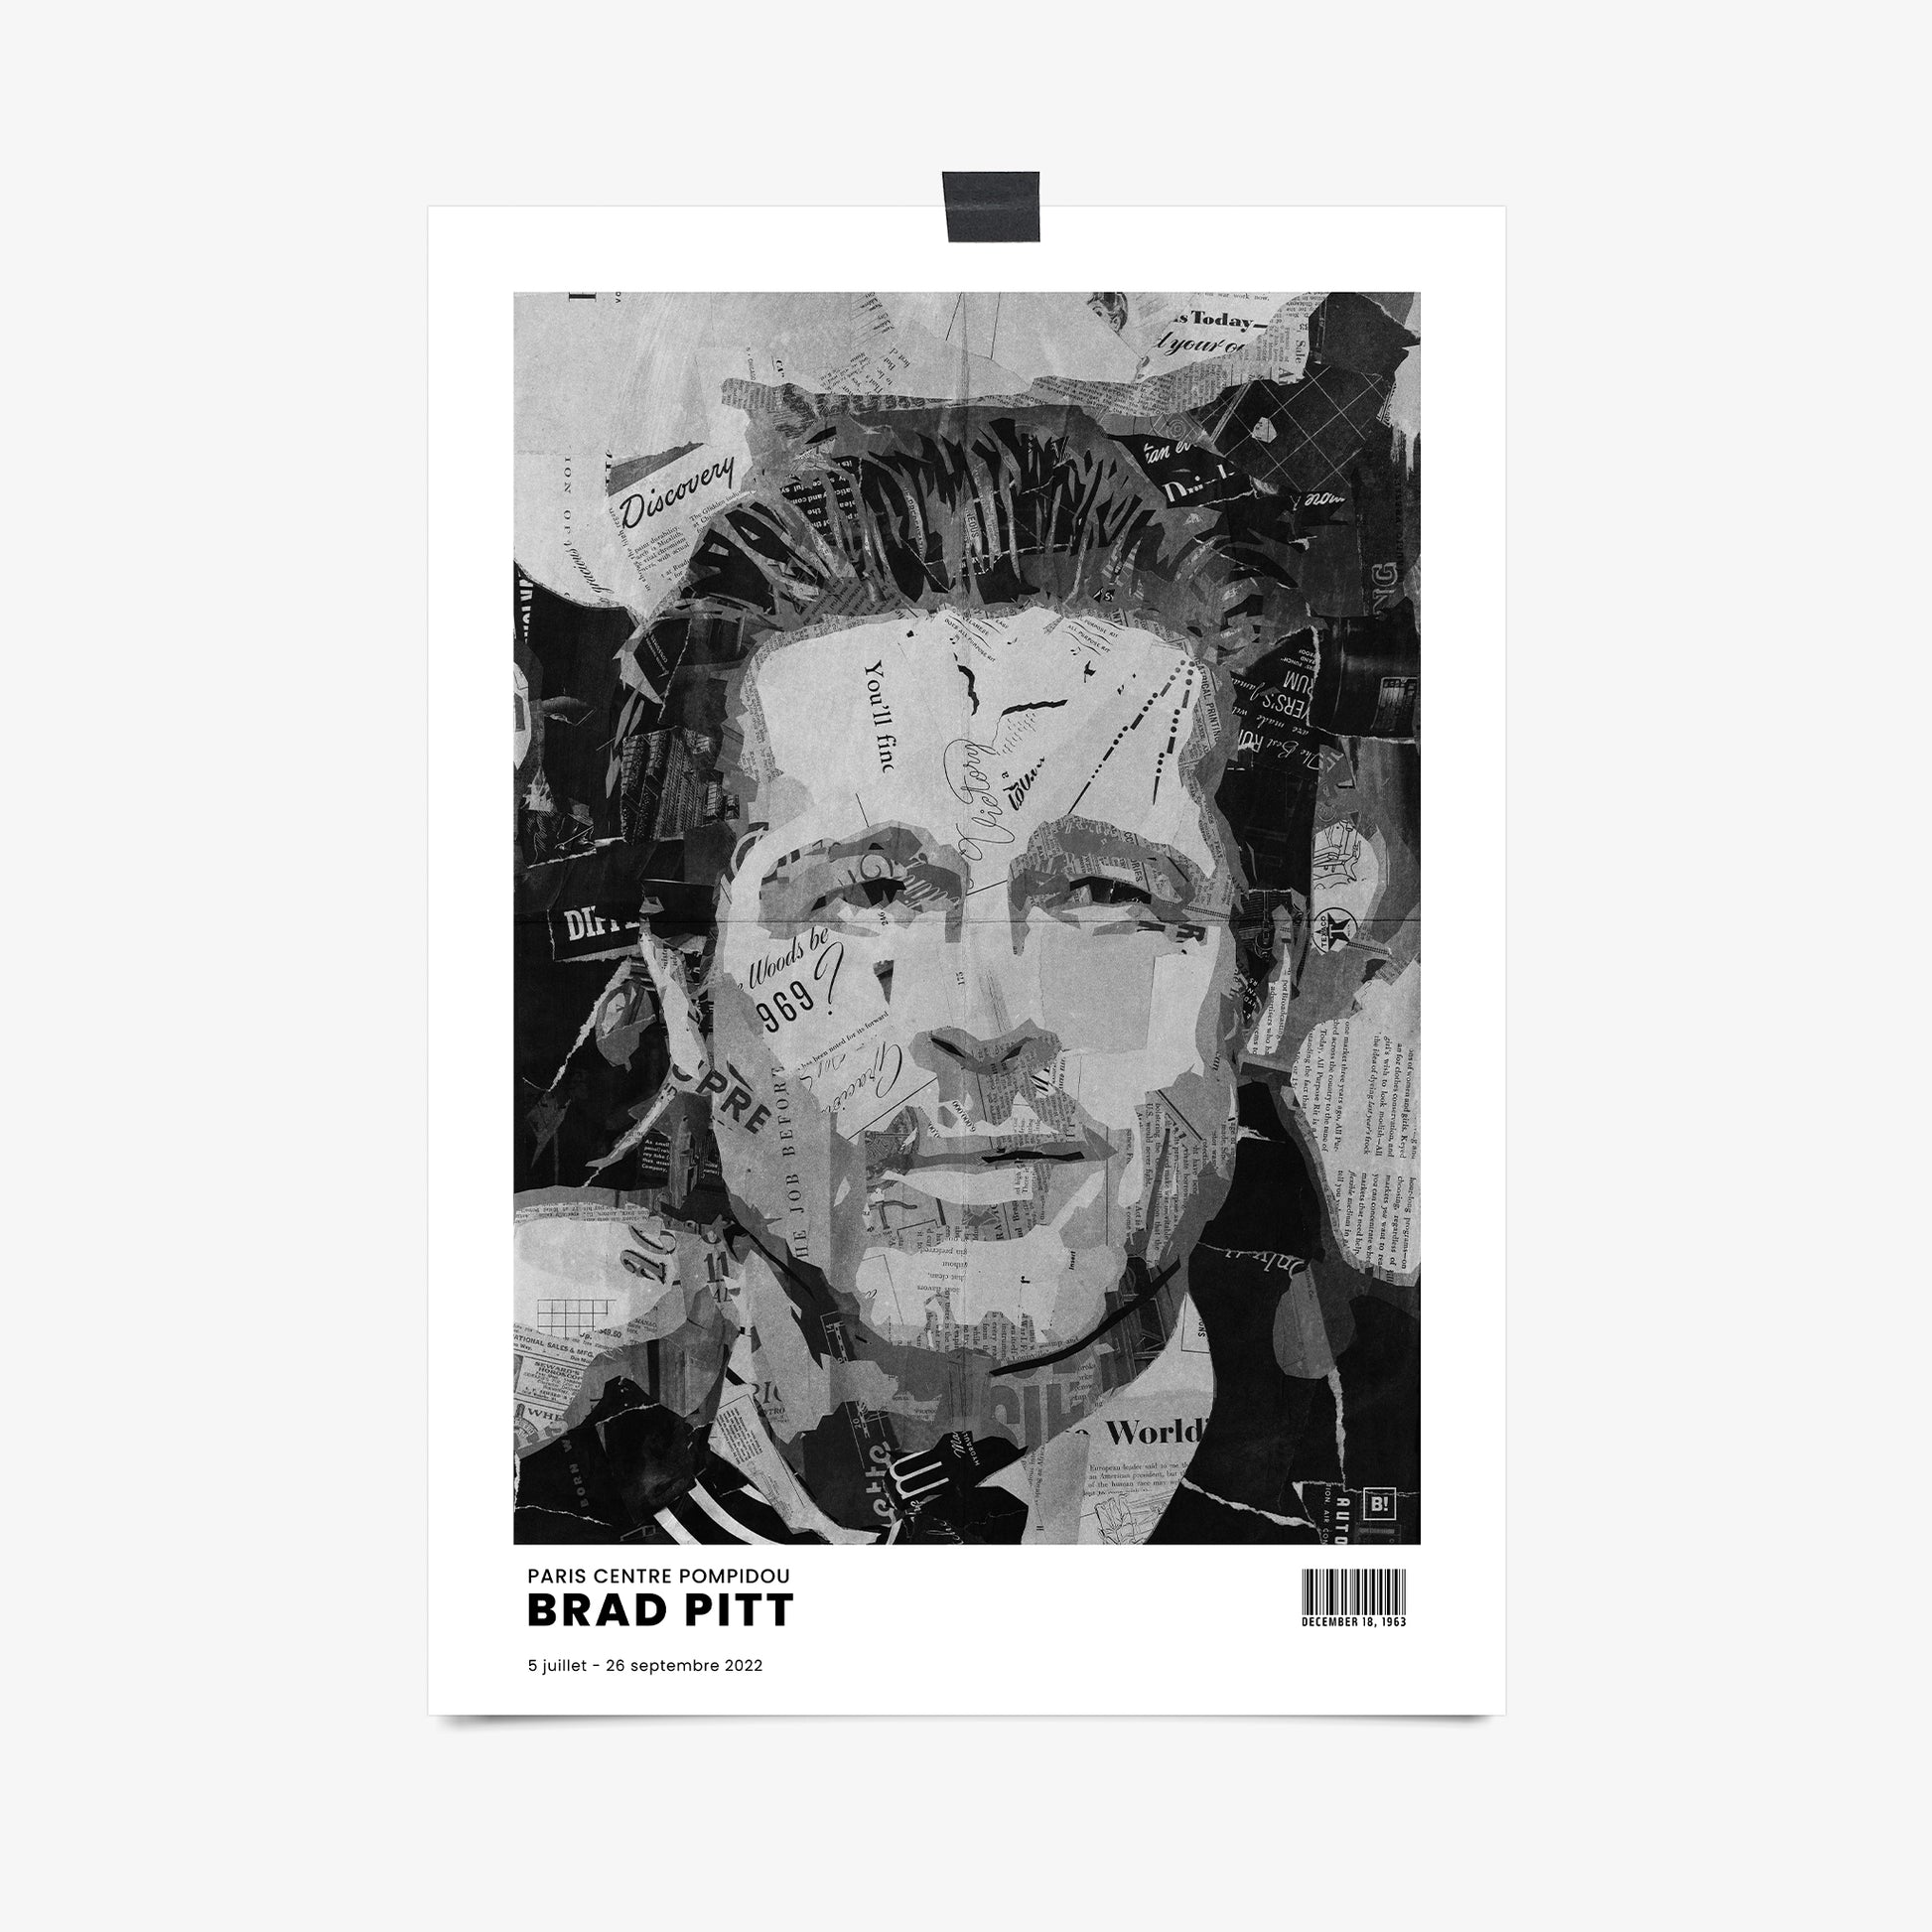 Be inspired by Iconic Brad Pitt Paris Centre Pompidou Exhibition Art Print. This artwork is printed using giclée on archival acid-free paper, capturing its timeless beauty in every detail.